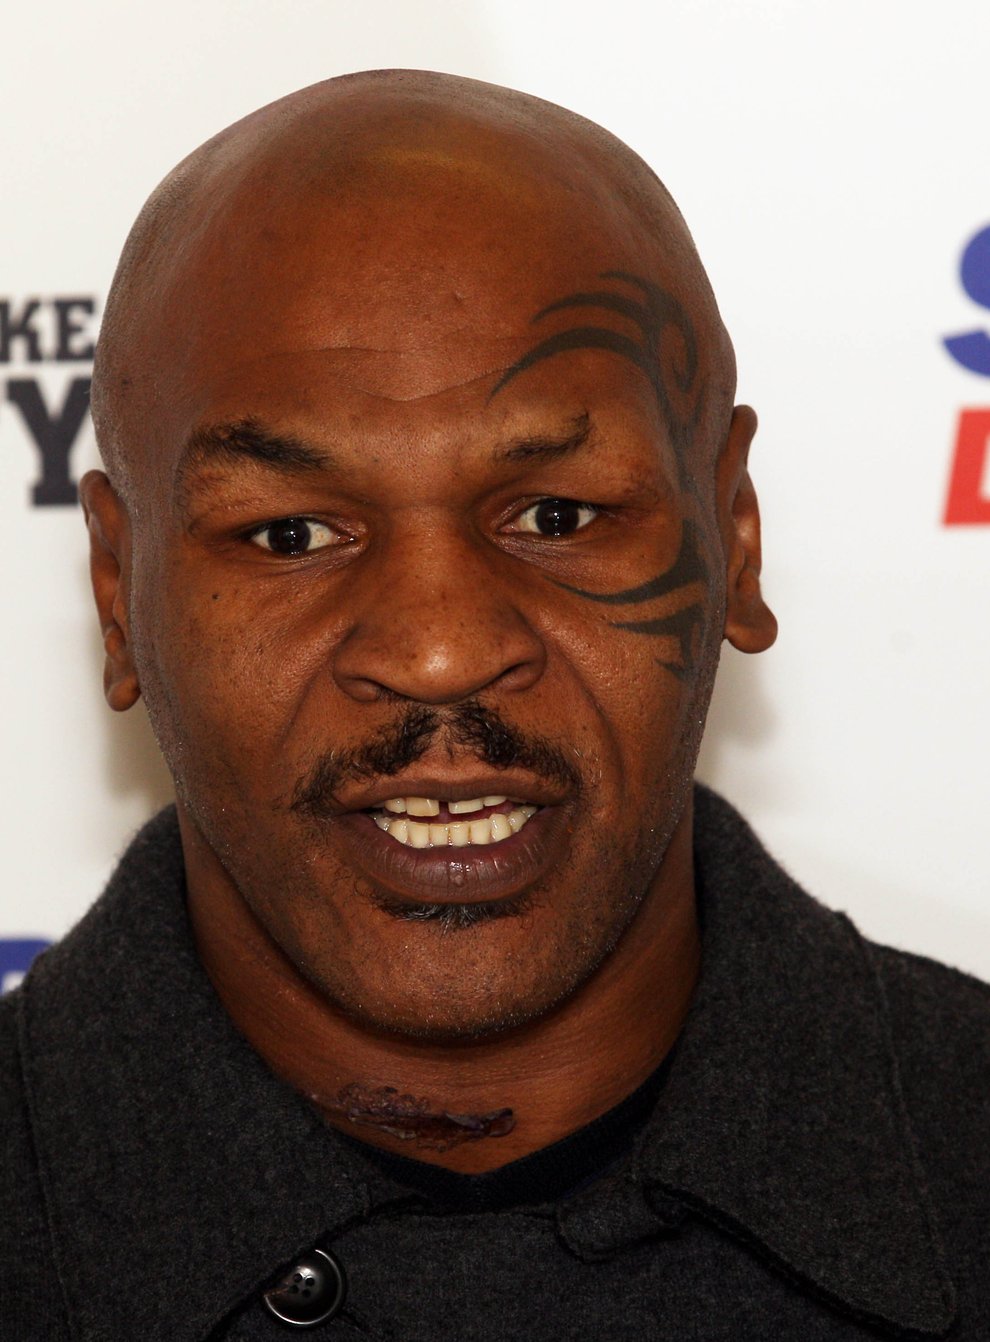 Tyson slurred his words throughout the interview with ITV on Tuesday